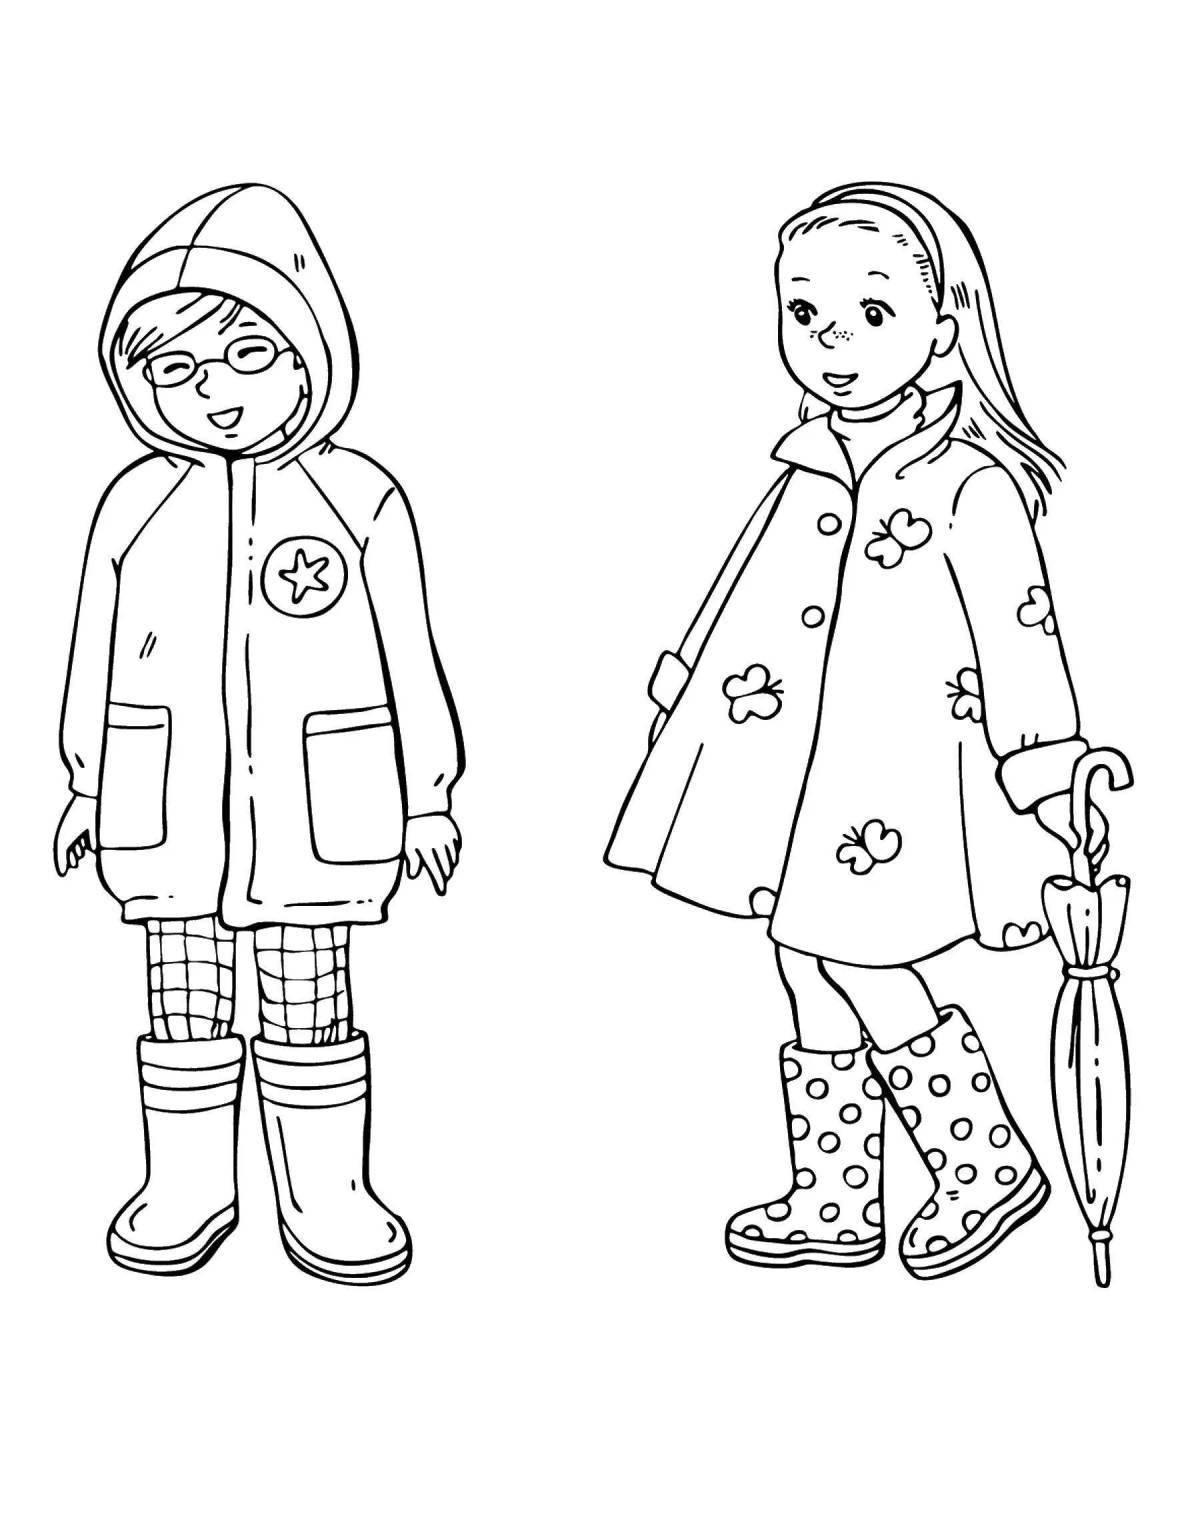 Incredible winter clothes coloring book for kids 5-6 years old